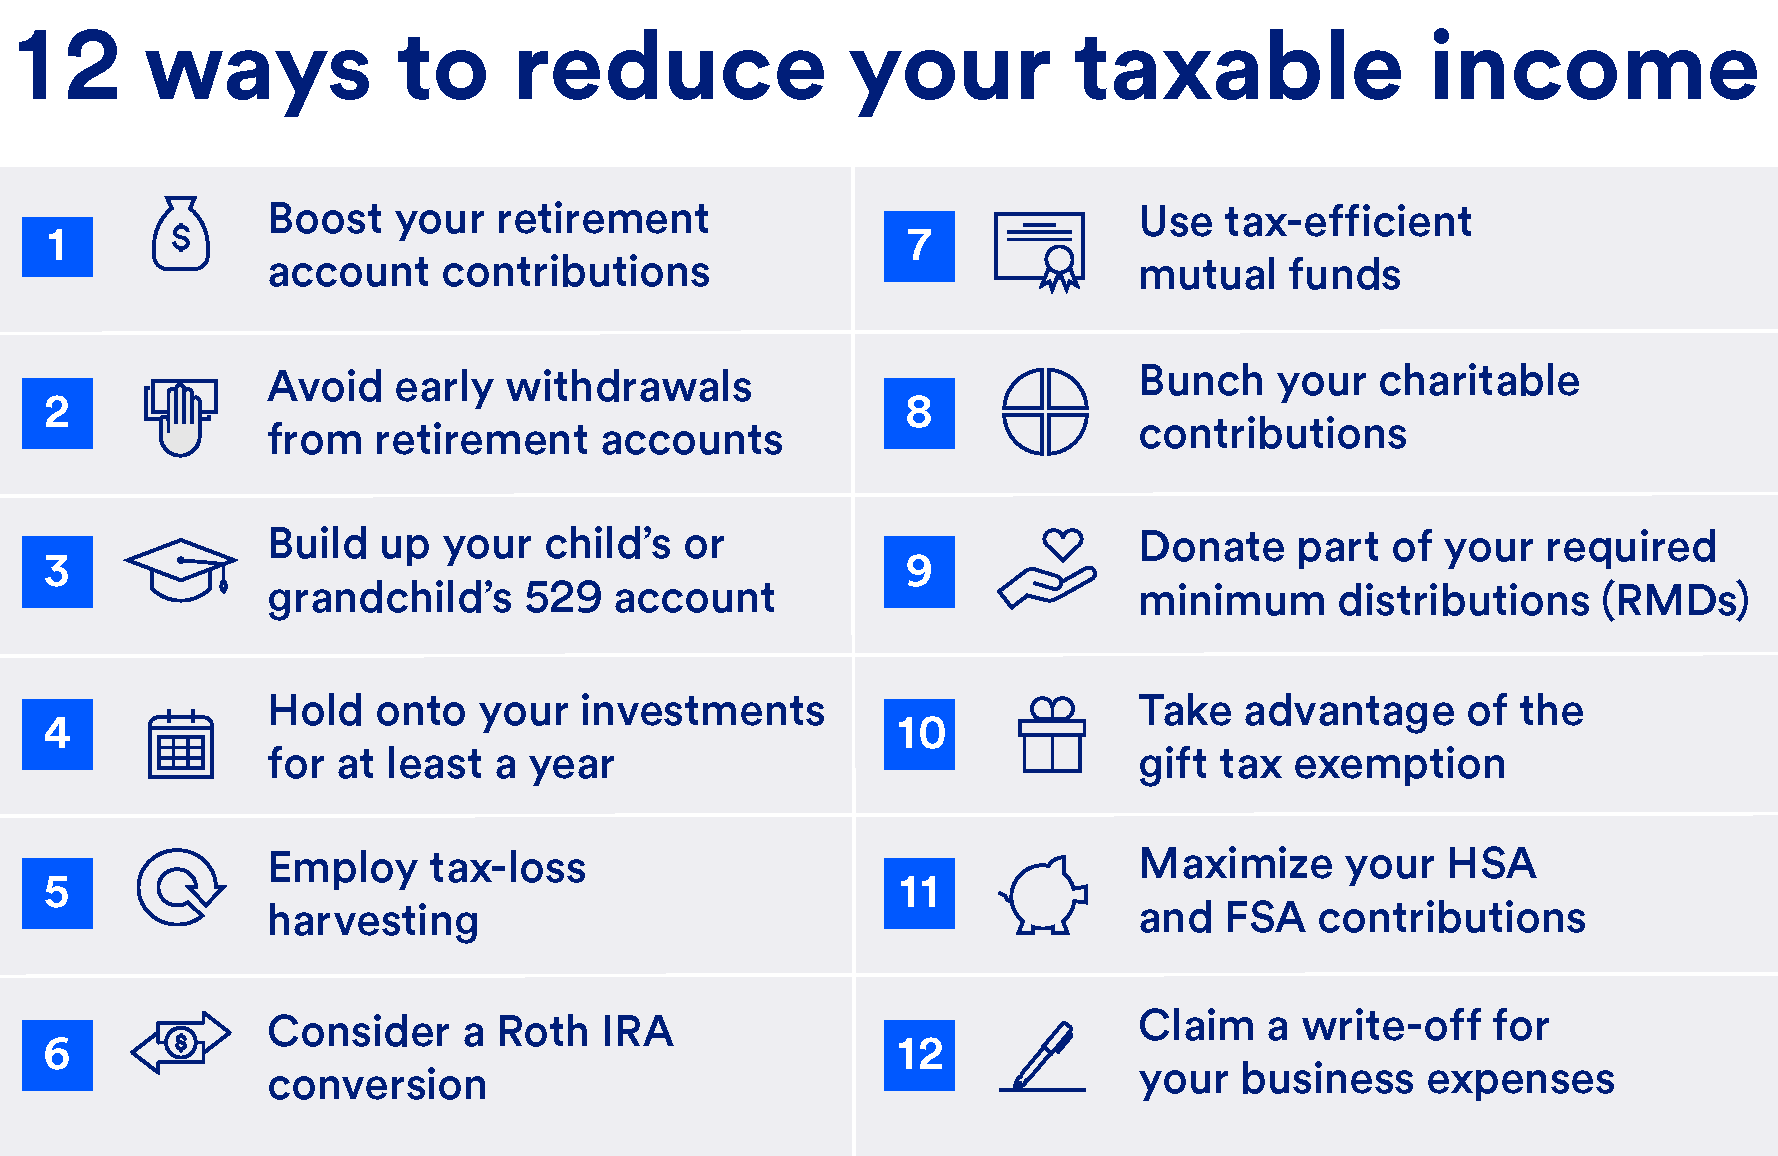 12 ways to reduce your taxable income include boosting your retirement account contributions, avoiding early withdrawals from retirement accounts, adding to your child's or grandchild's 529 account, holding onto investments for at least a year, employing tax loss harvesting, considering a Roth IRA conversion, using tax efficient mutual funds, bunching charitable contributions, donating part of your required minimum distributions, taking advantage of the gift tax exemption, maximizing your HSA and FSA contributions, and claiming a write-off for business expenses (for business owners).